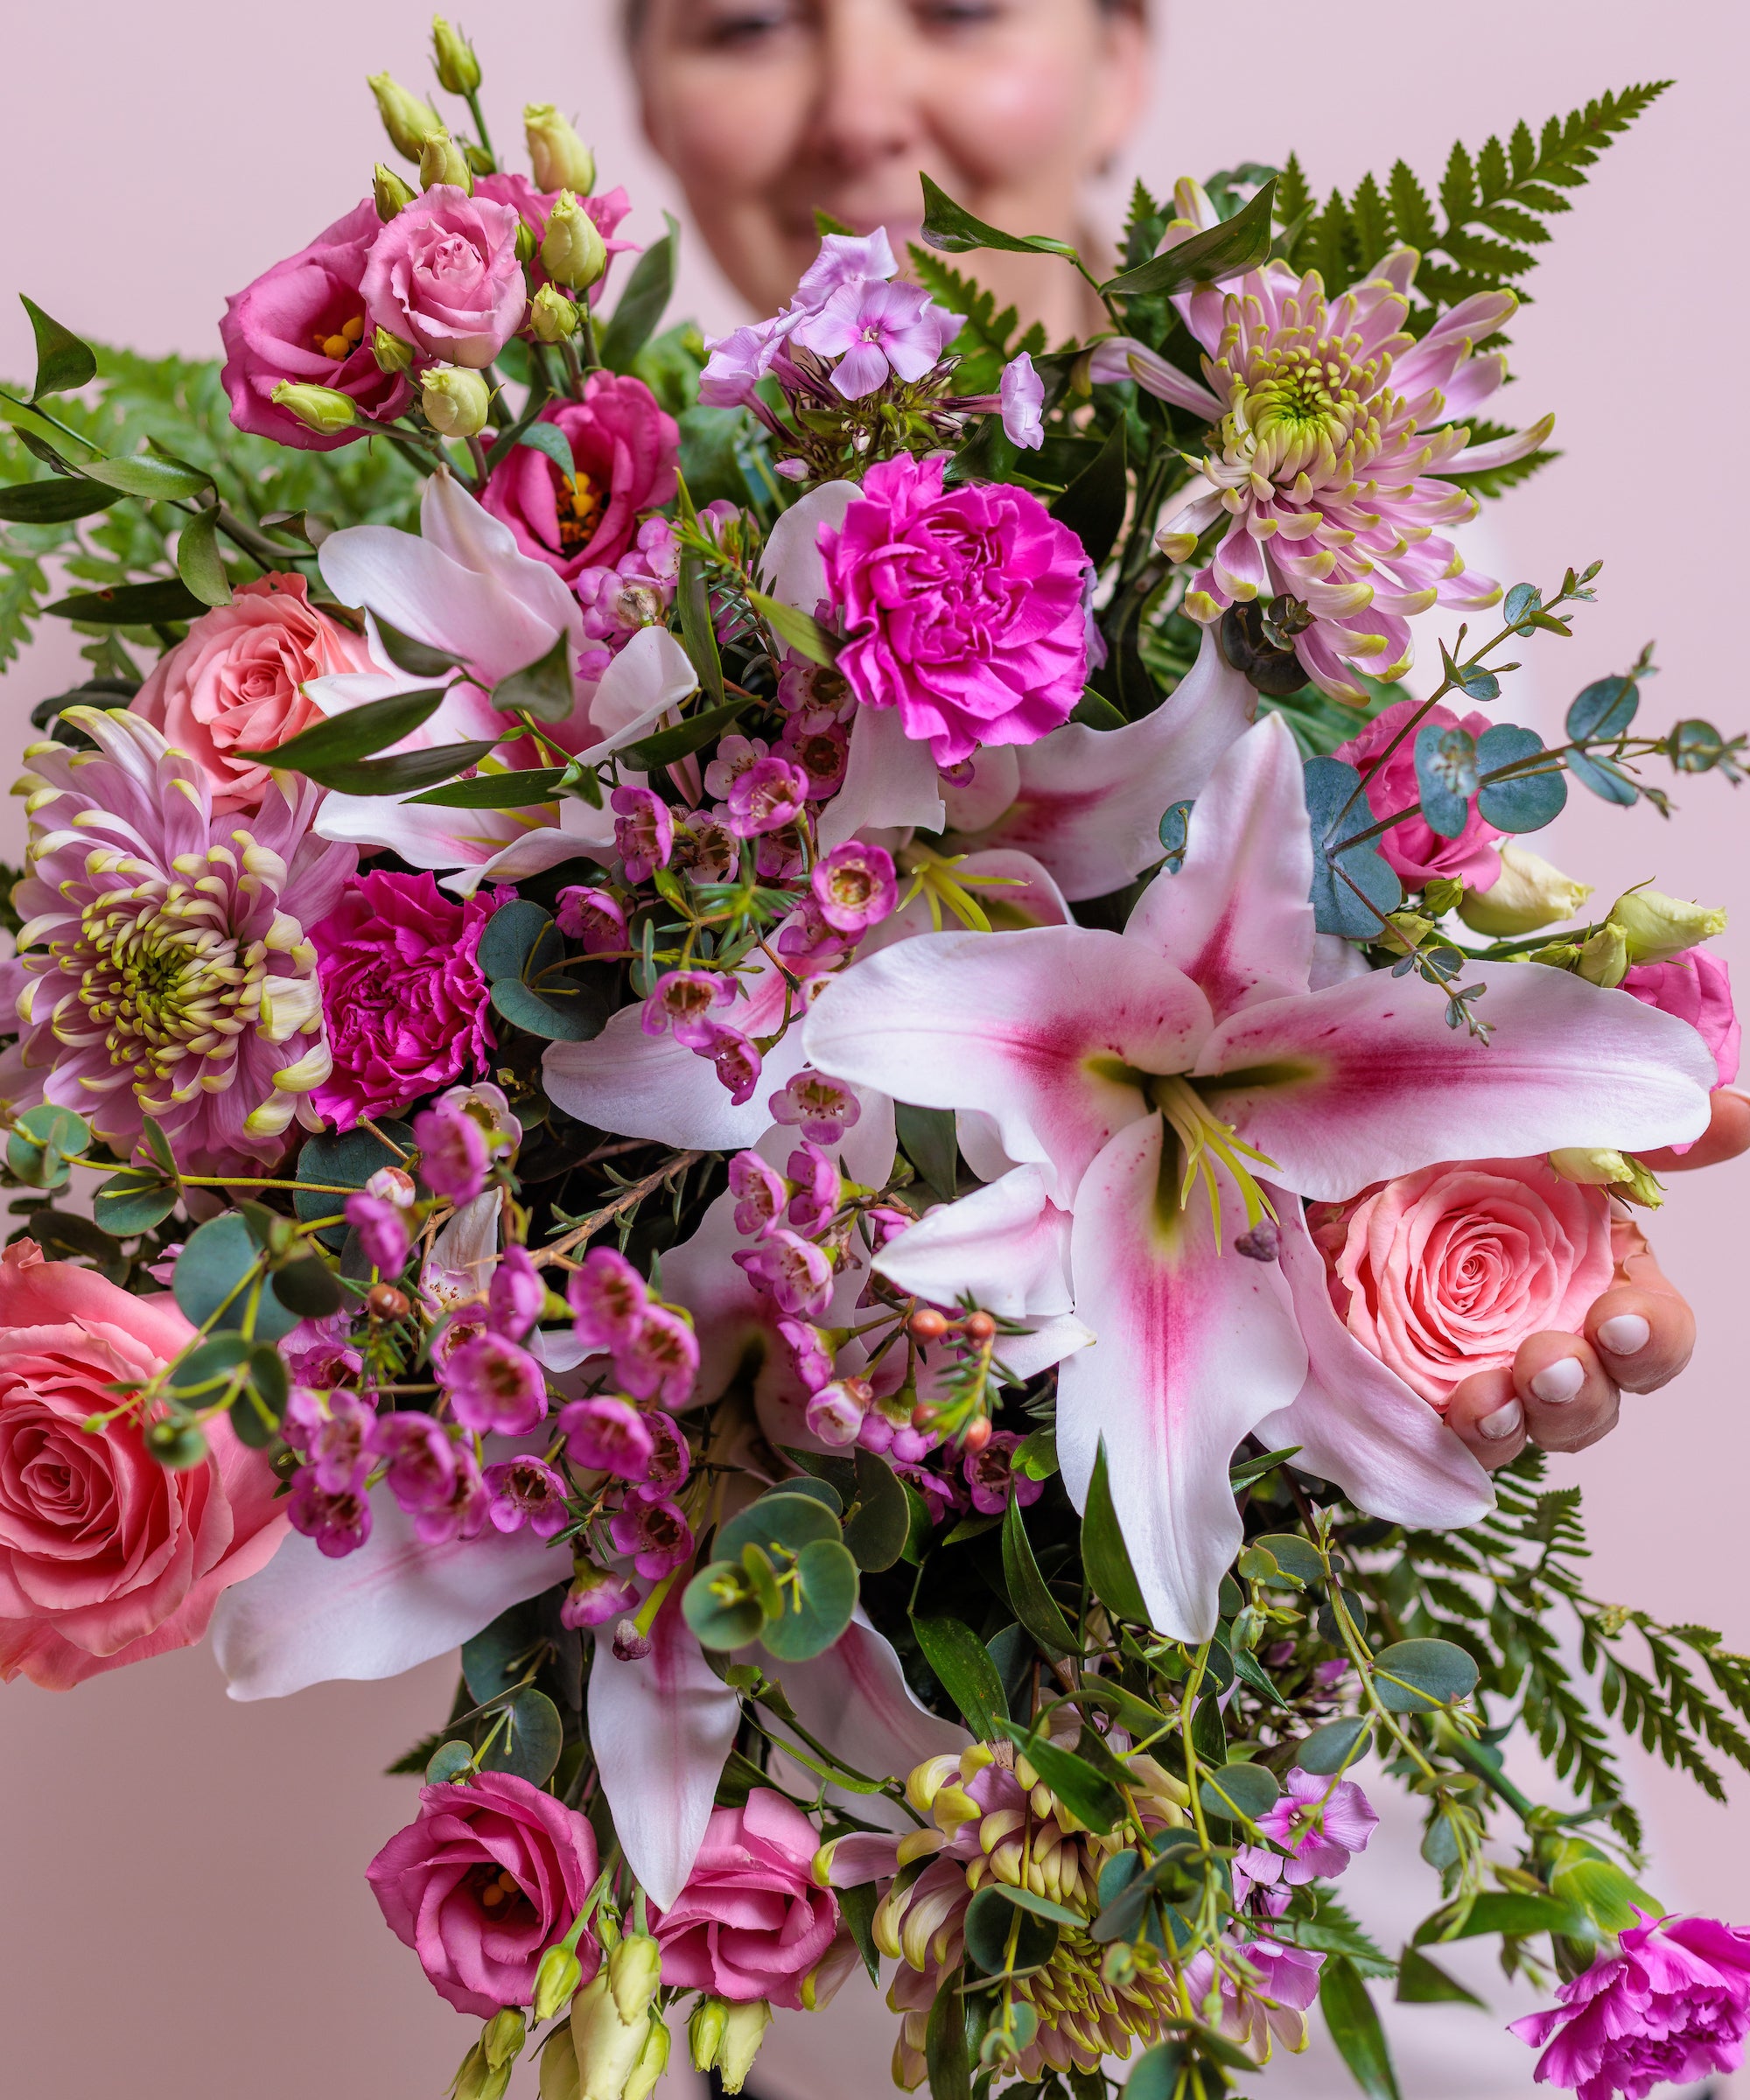 Perfect Pinks Bouquet